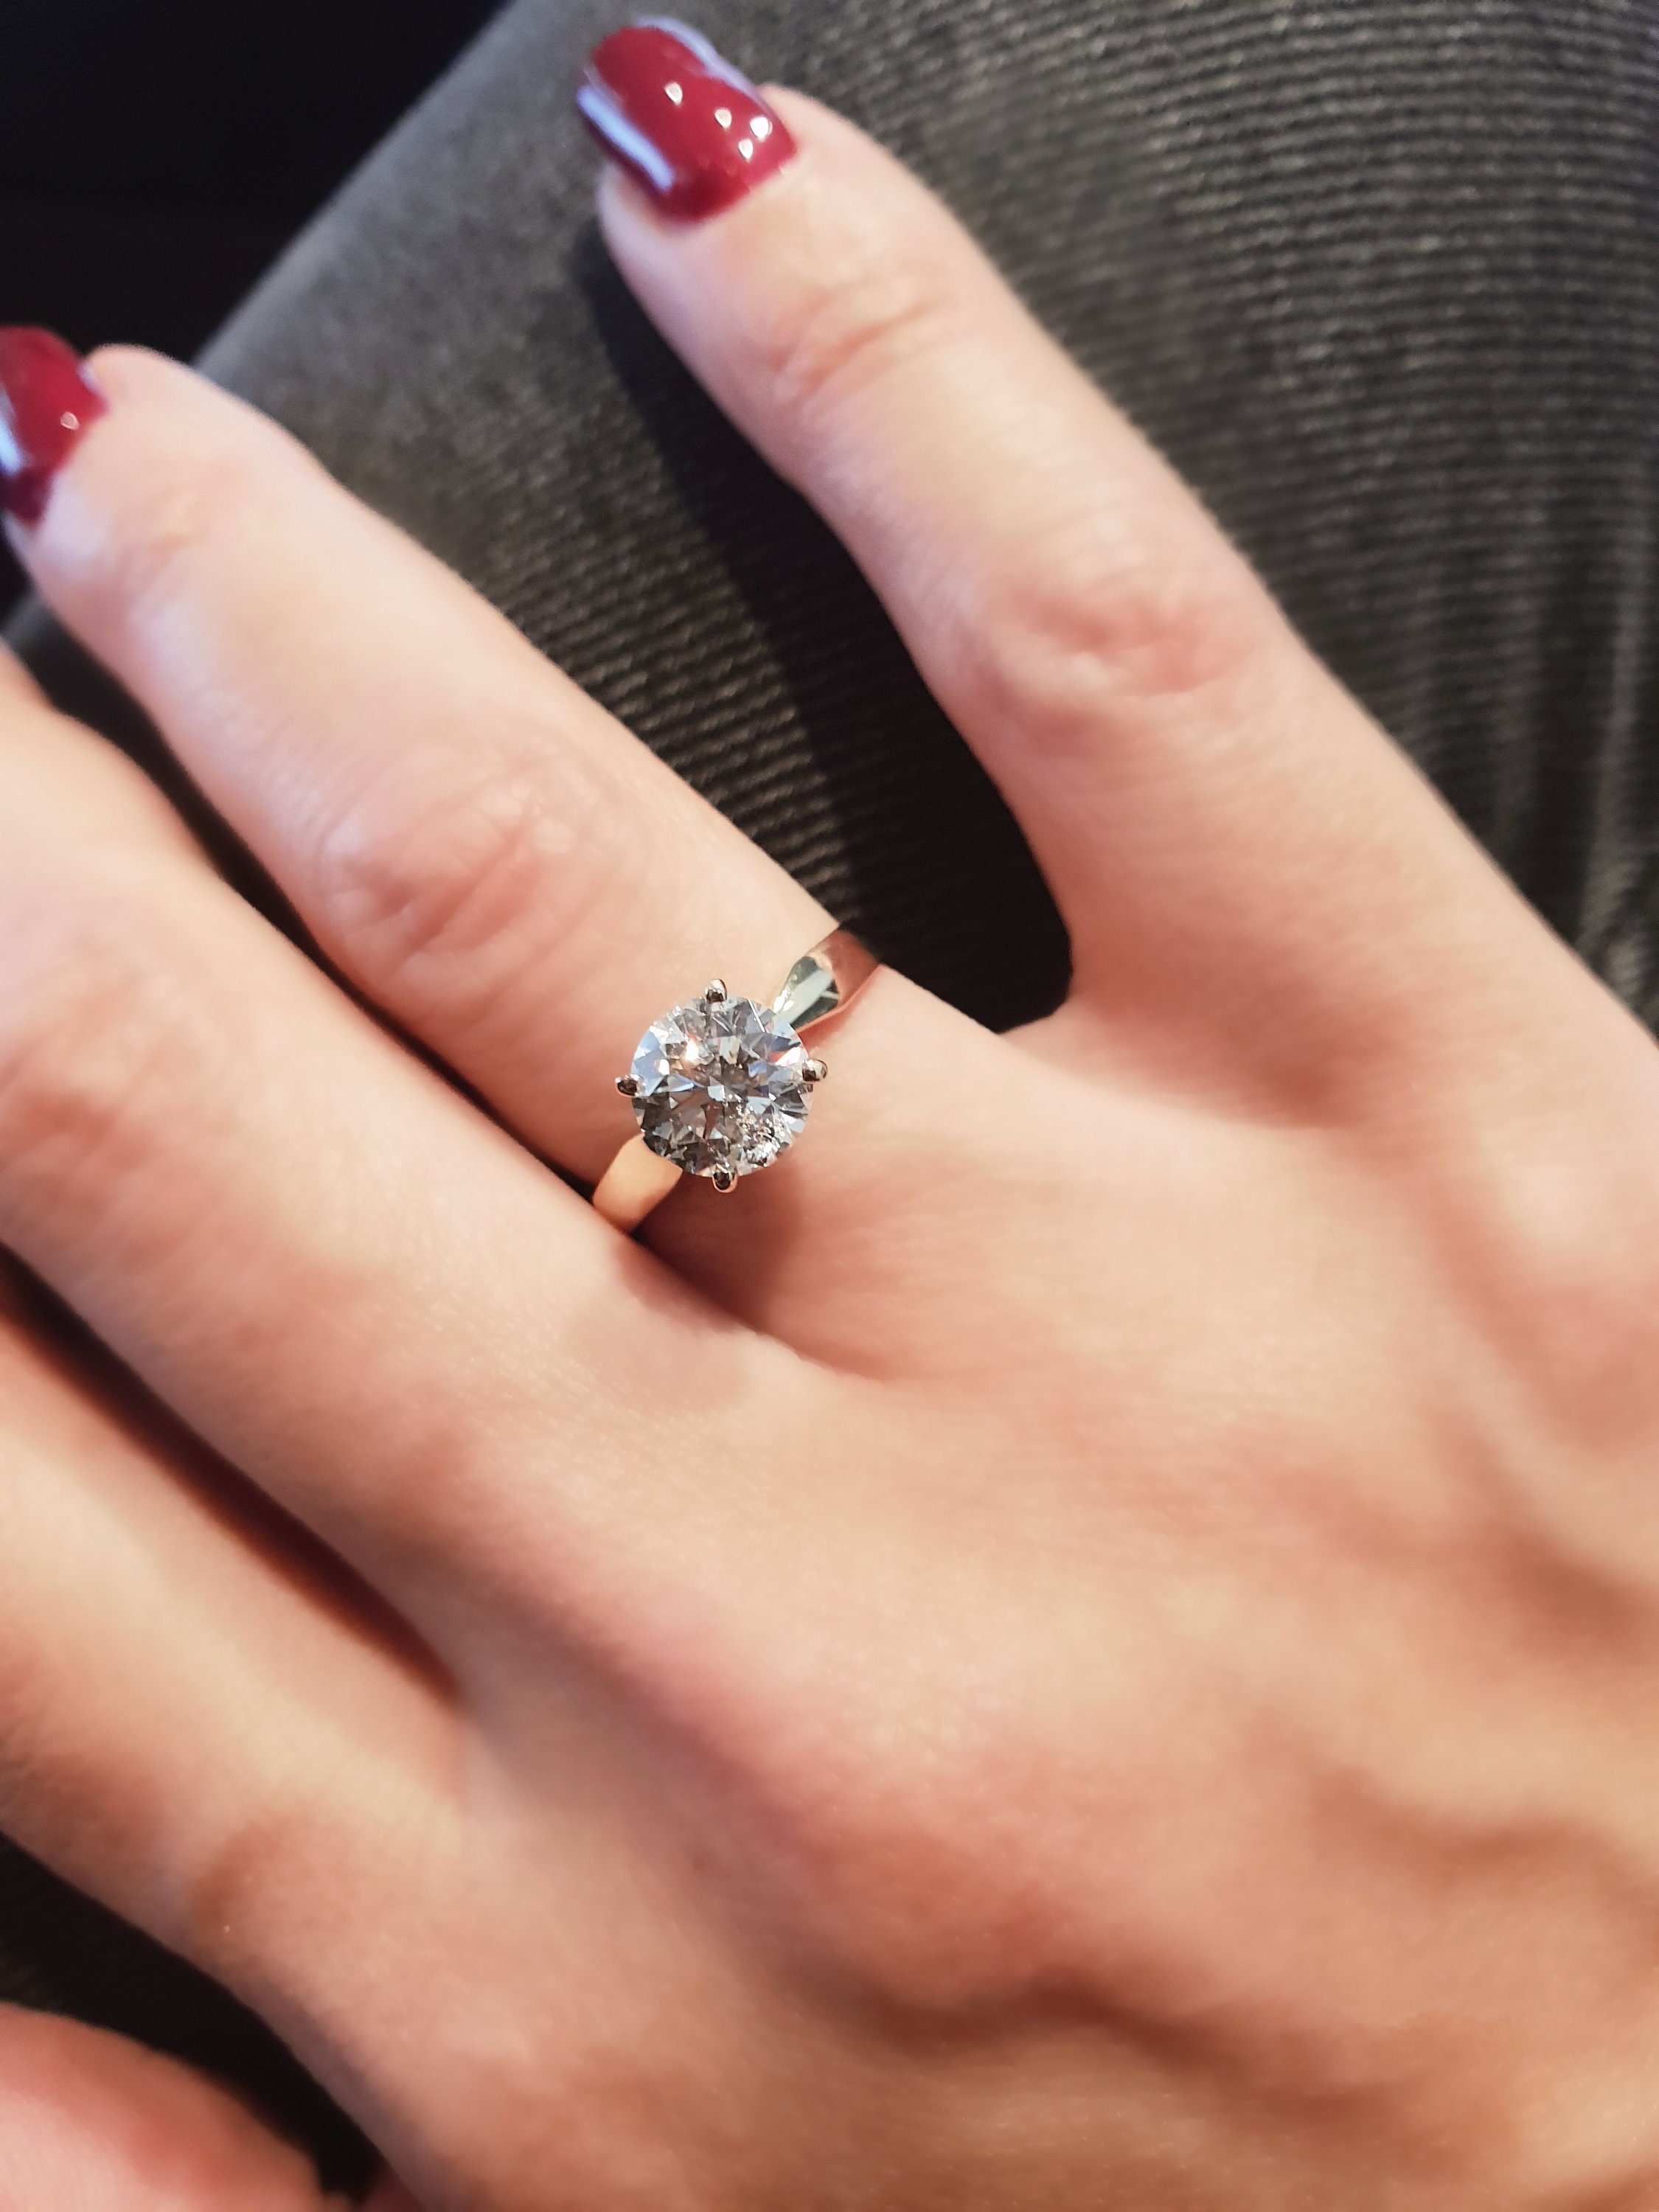 Solitaire Engagement Rings: Simple Yet Striking - Diamonds By Raymond Lee